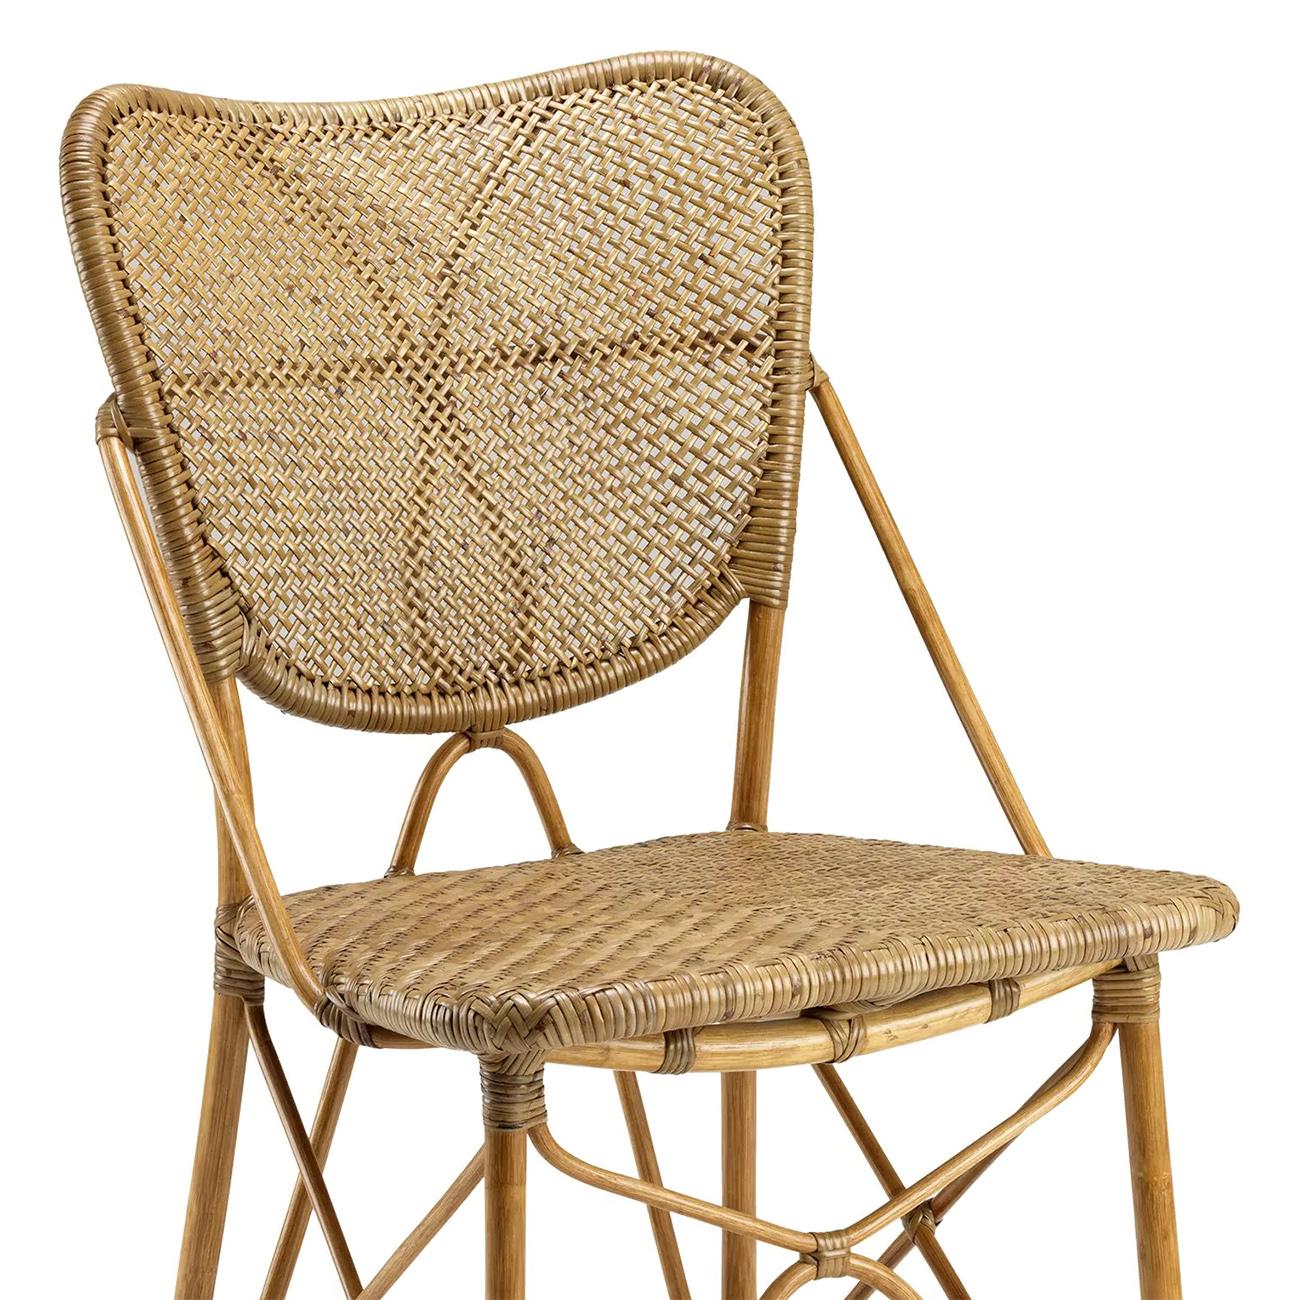 Chair Rattan Style all in
natural rattan in clear finish.